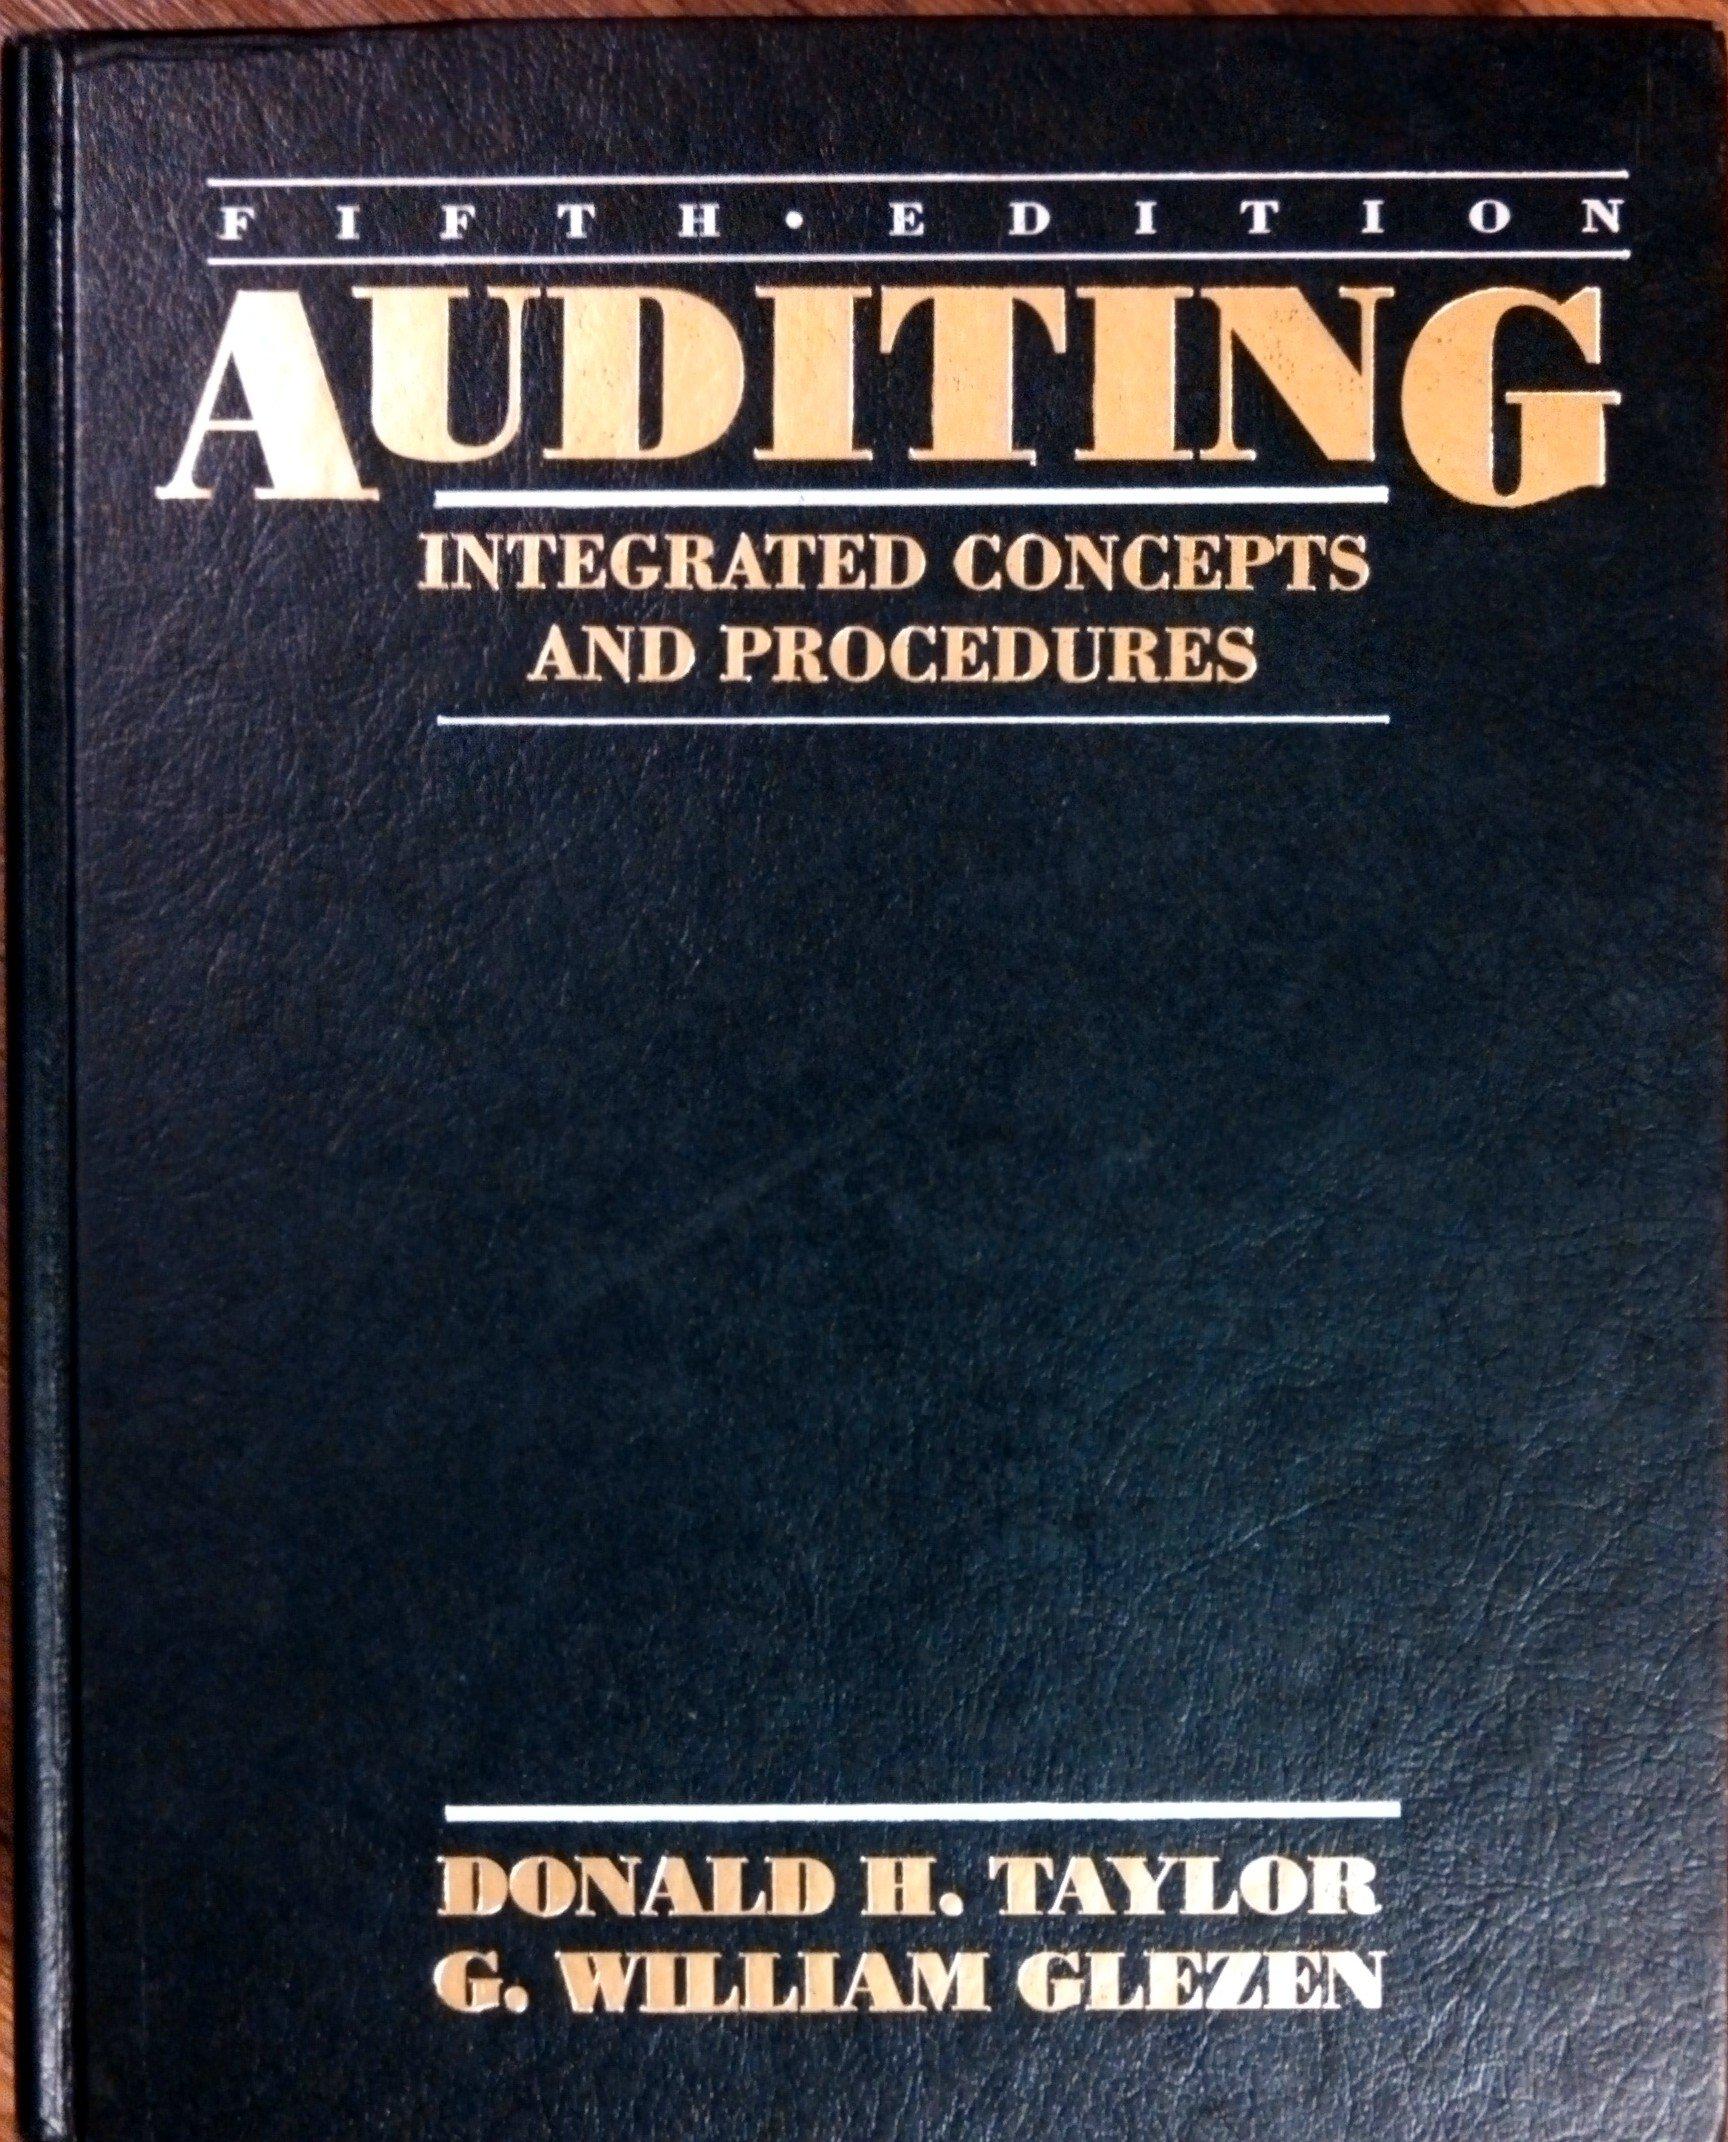 Auditing Integrated Concepts And Procedures